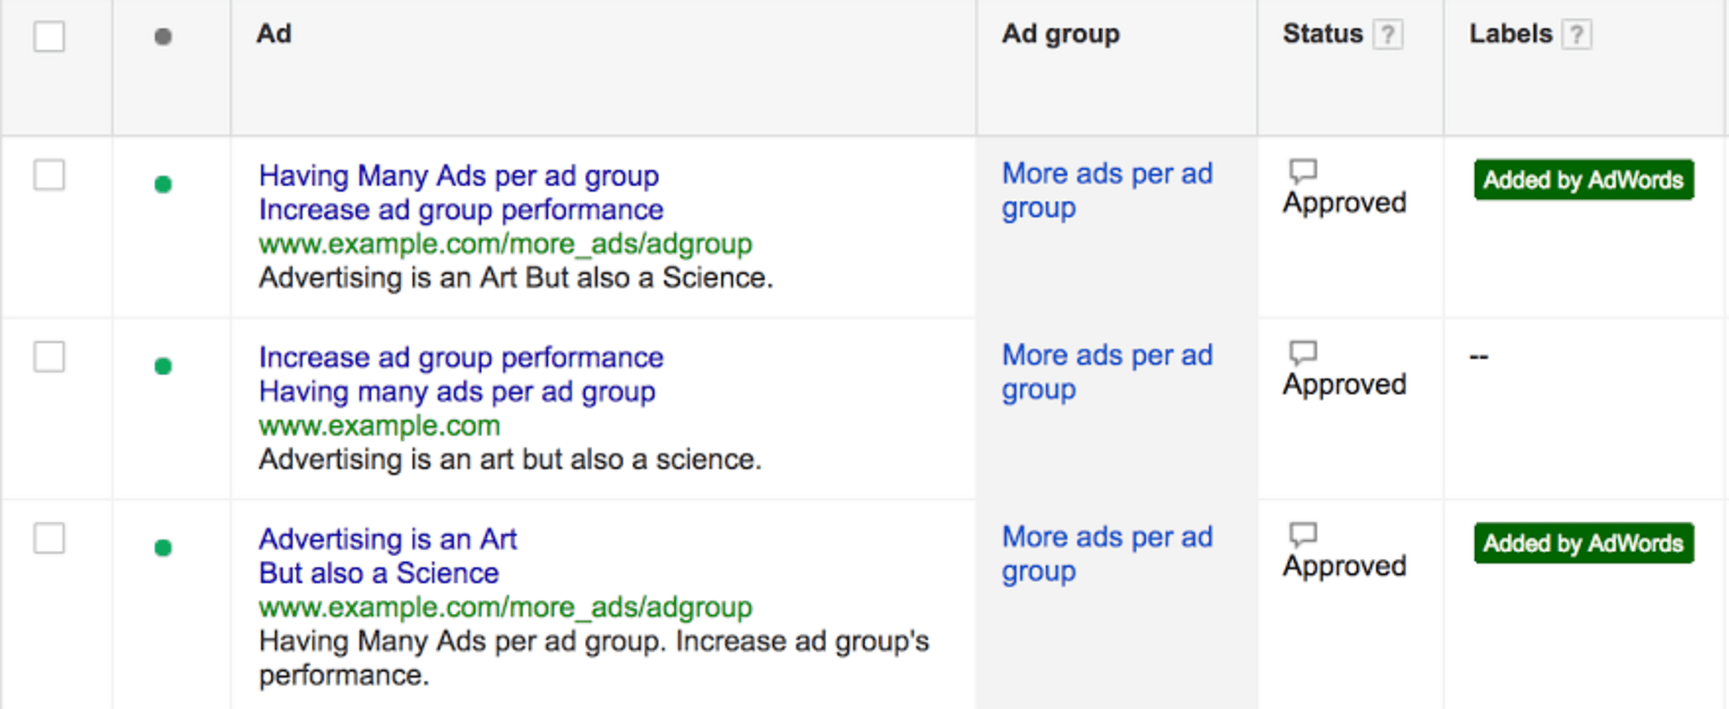 ads-added-by-adwords.png